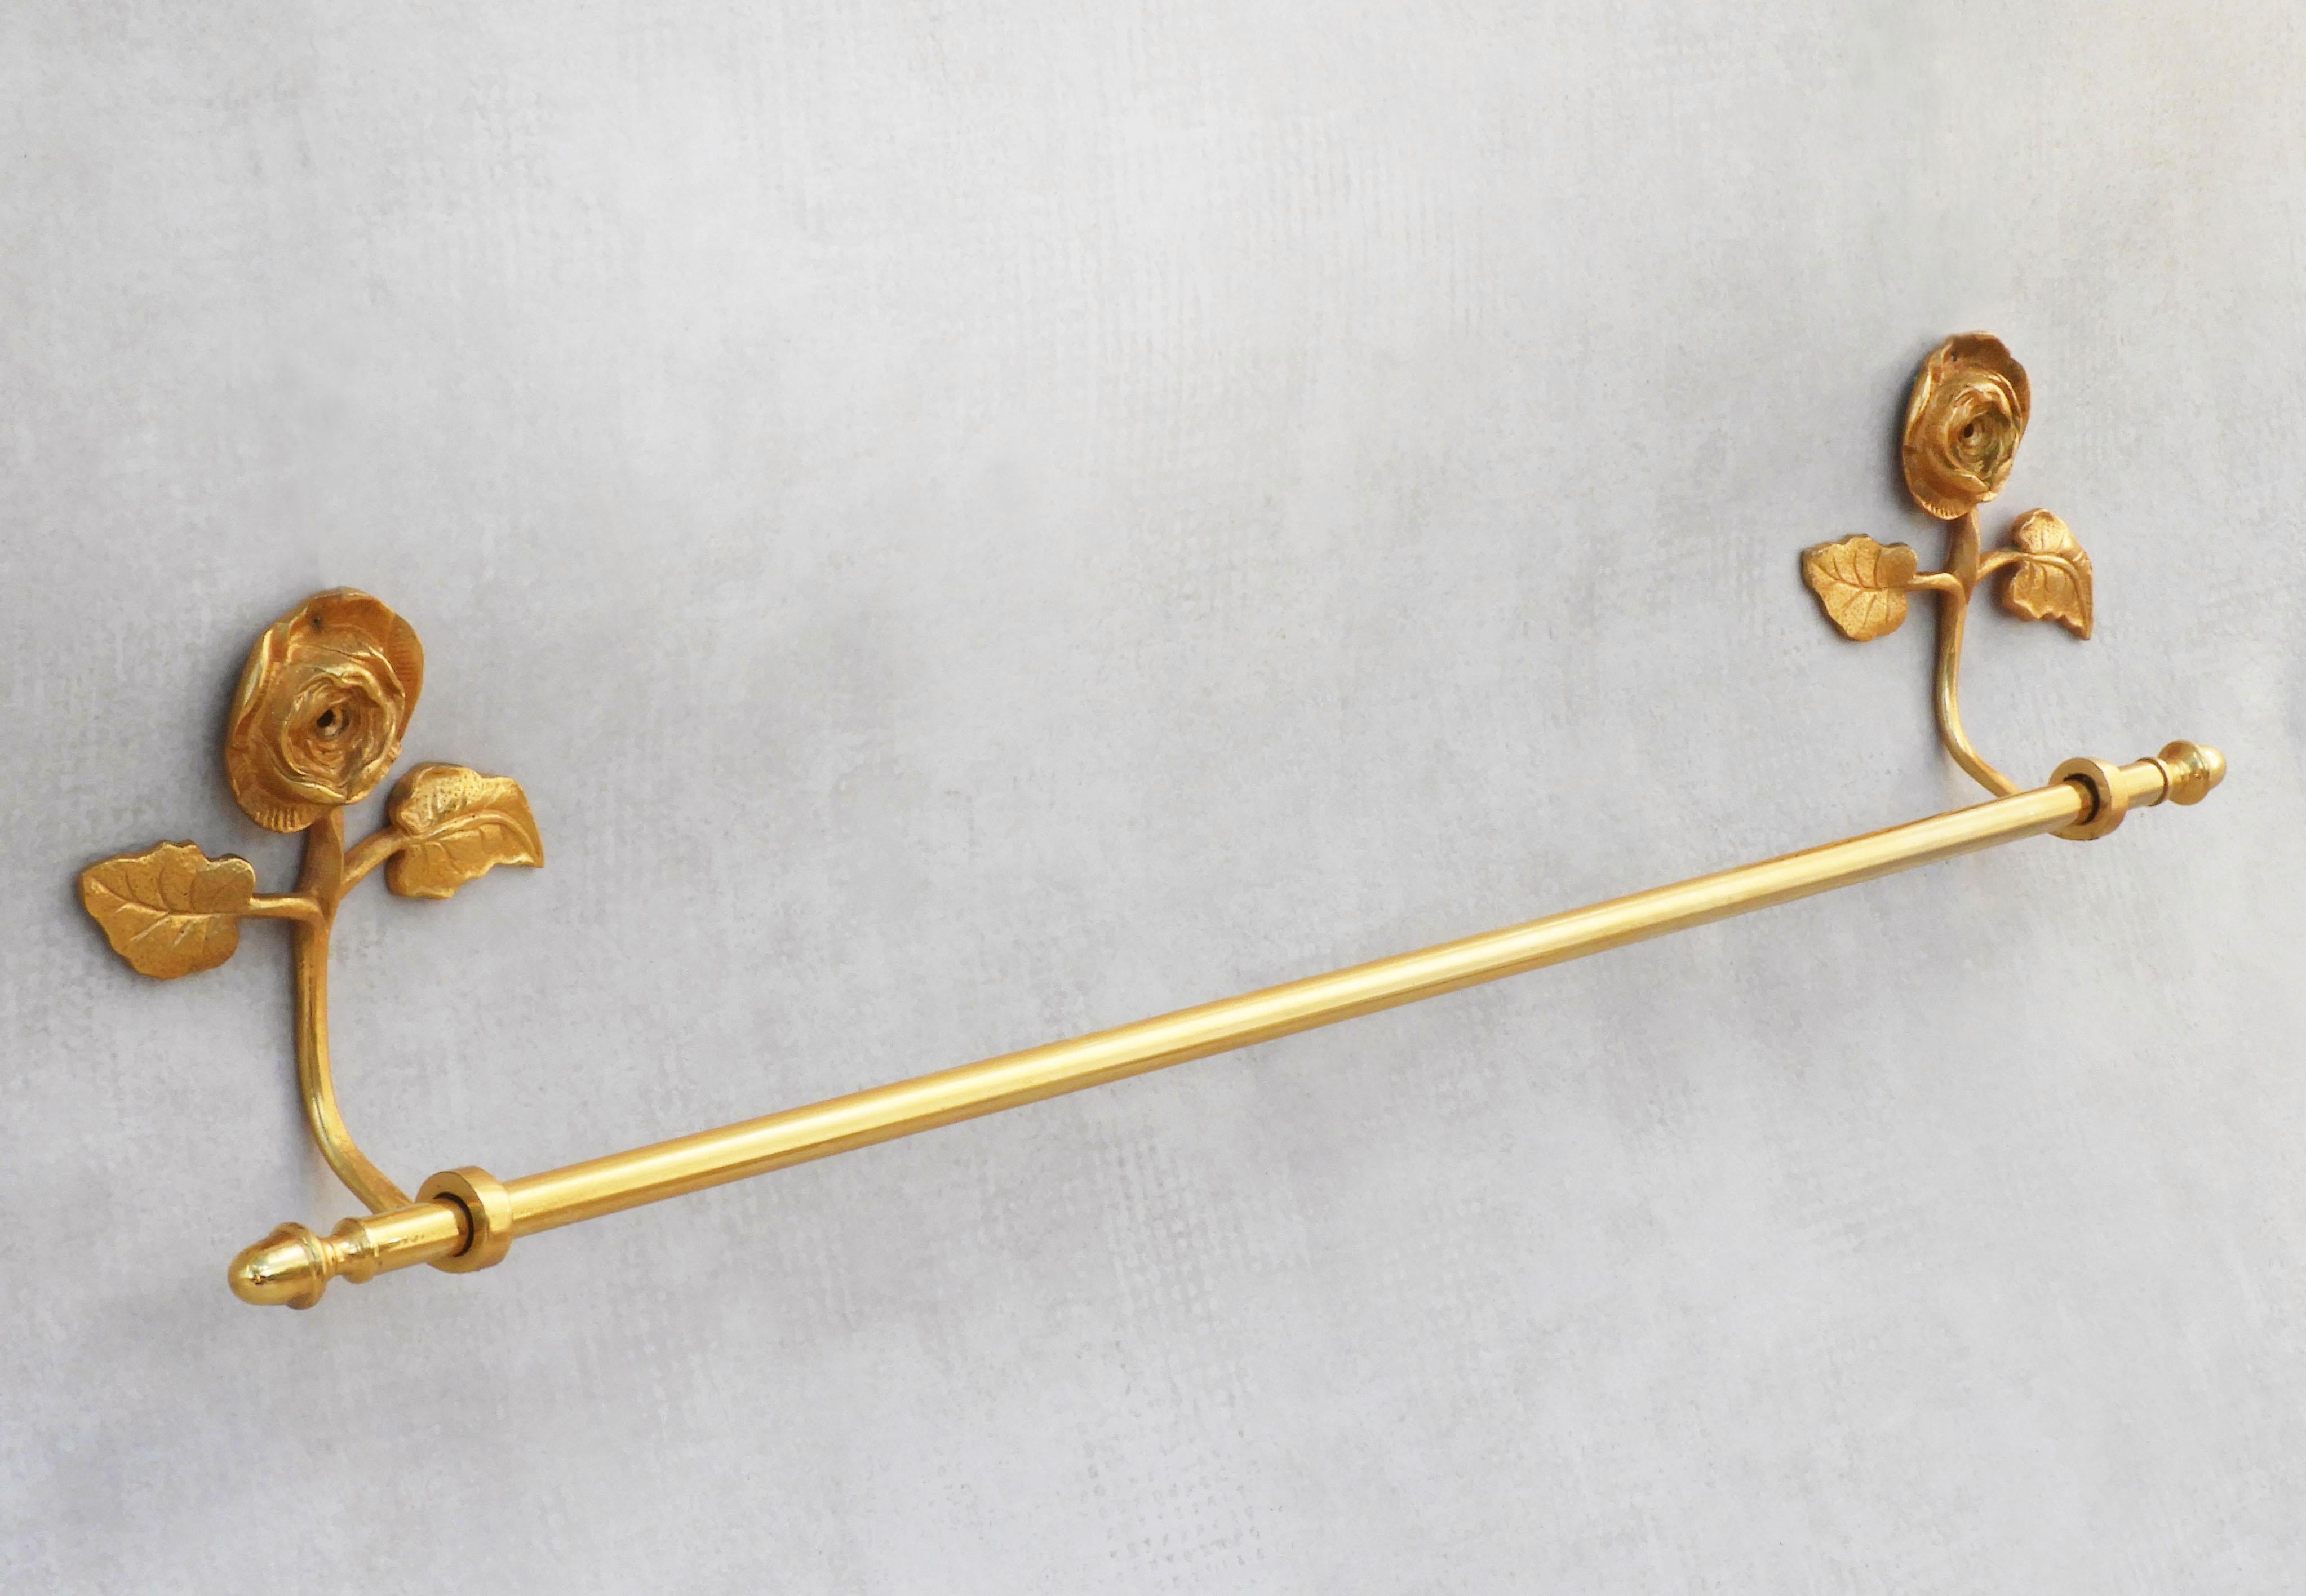 Charming French mid-century rose bloom gilded towel bar or rail C1950. Part of a selection of bathroom accessories and wall light sconces available in the same style - please see our other listings.
In good vintage condition with only light wear